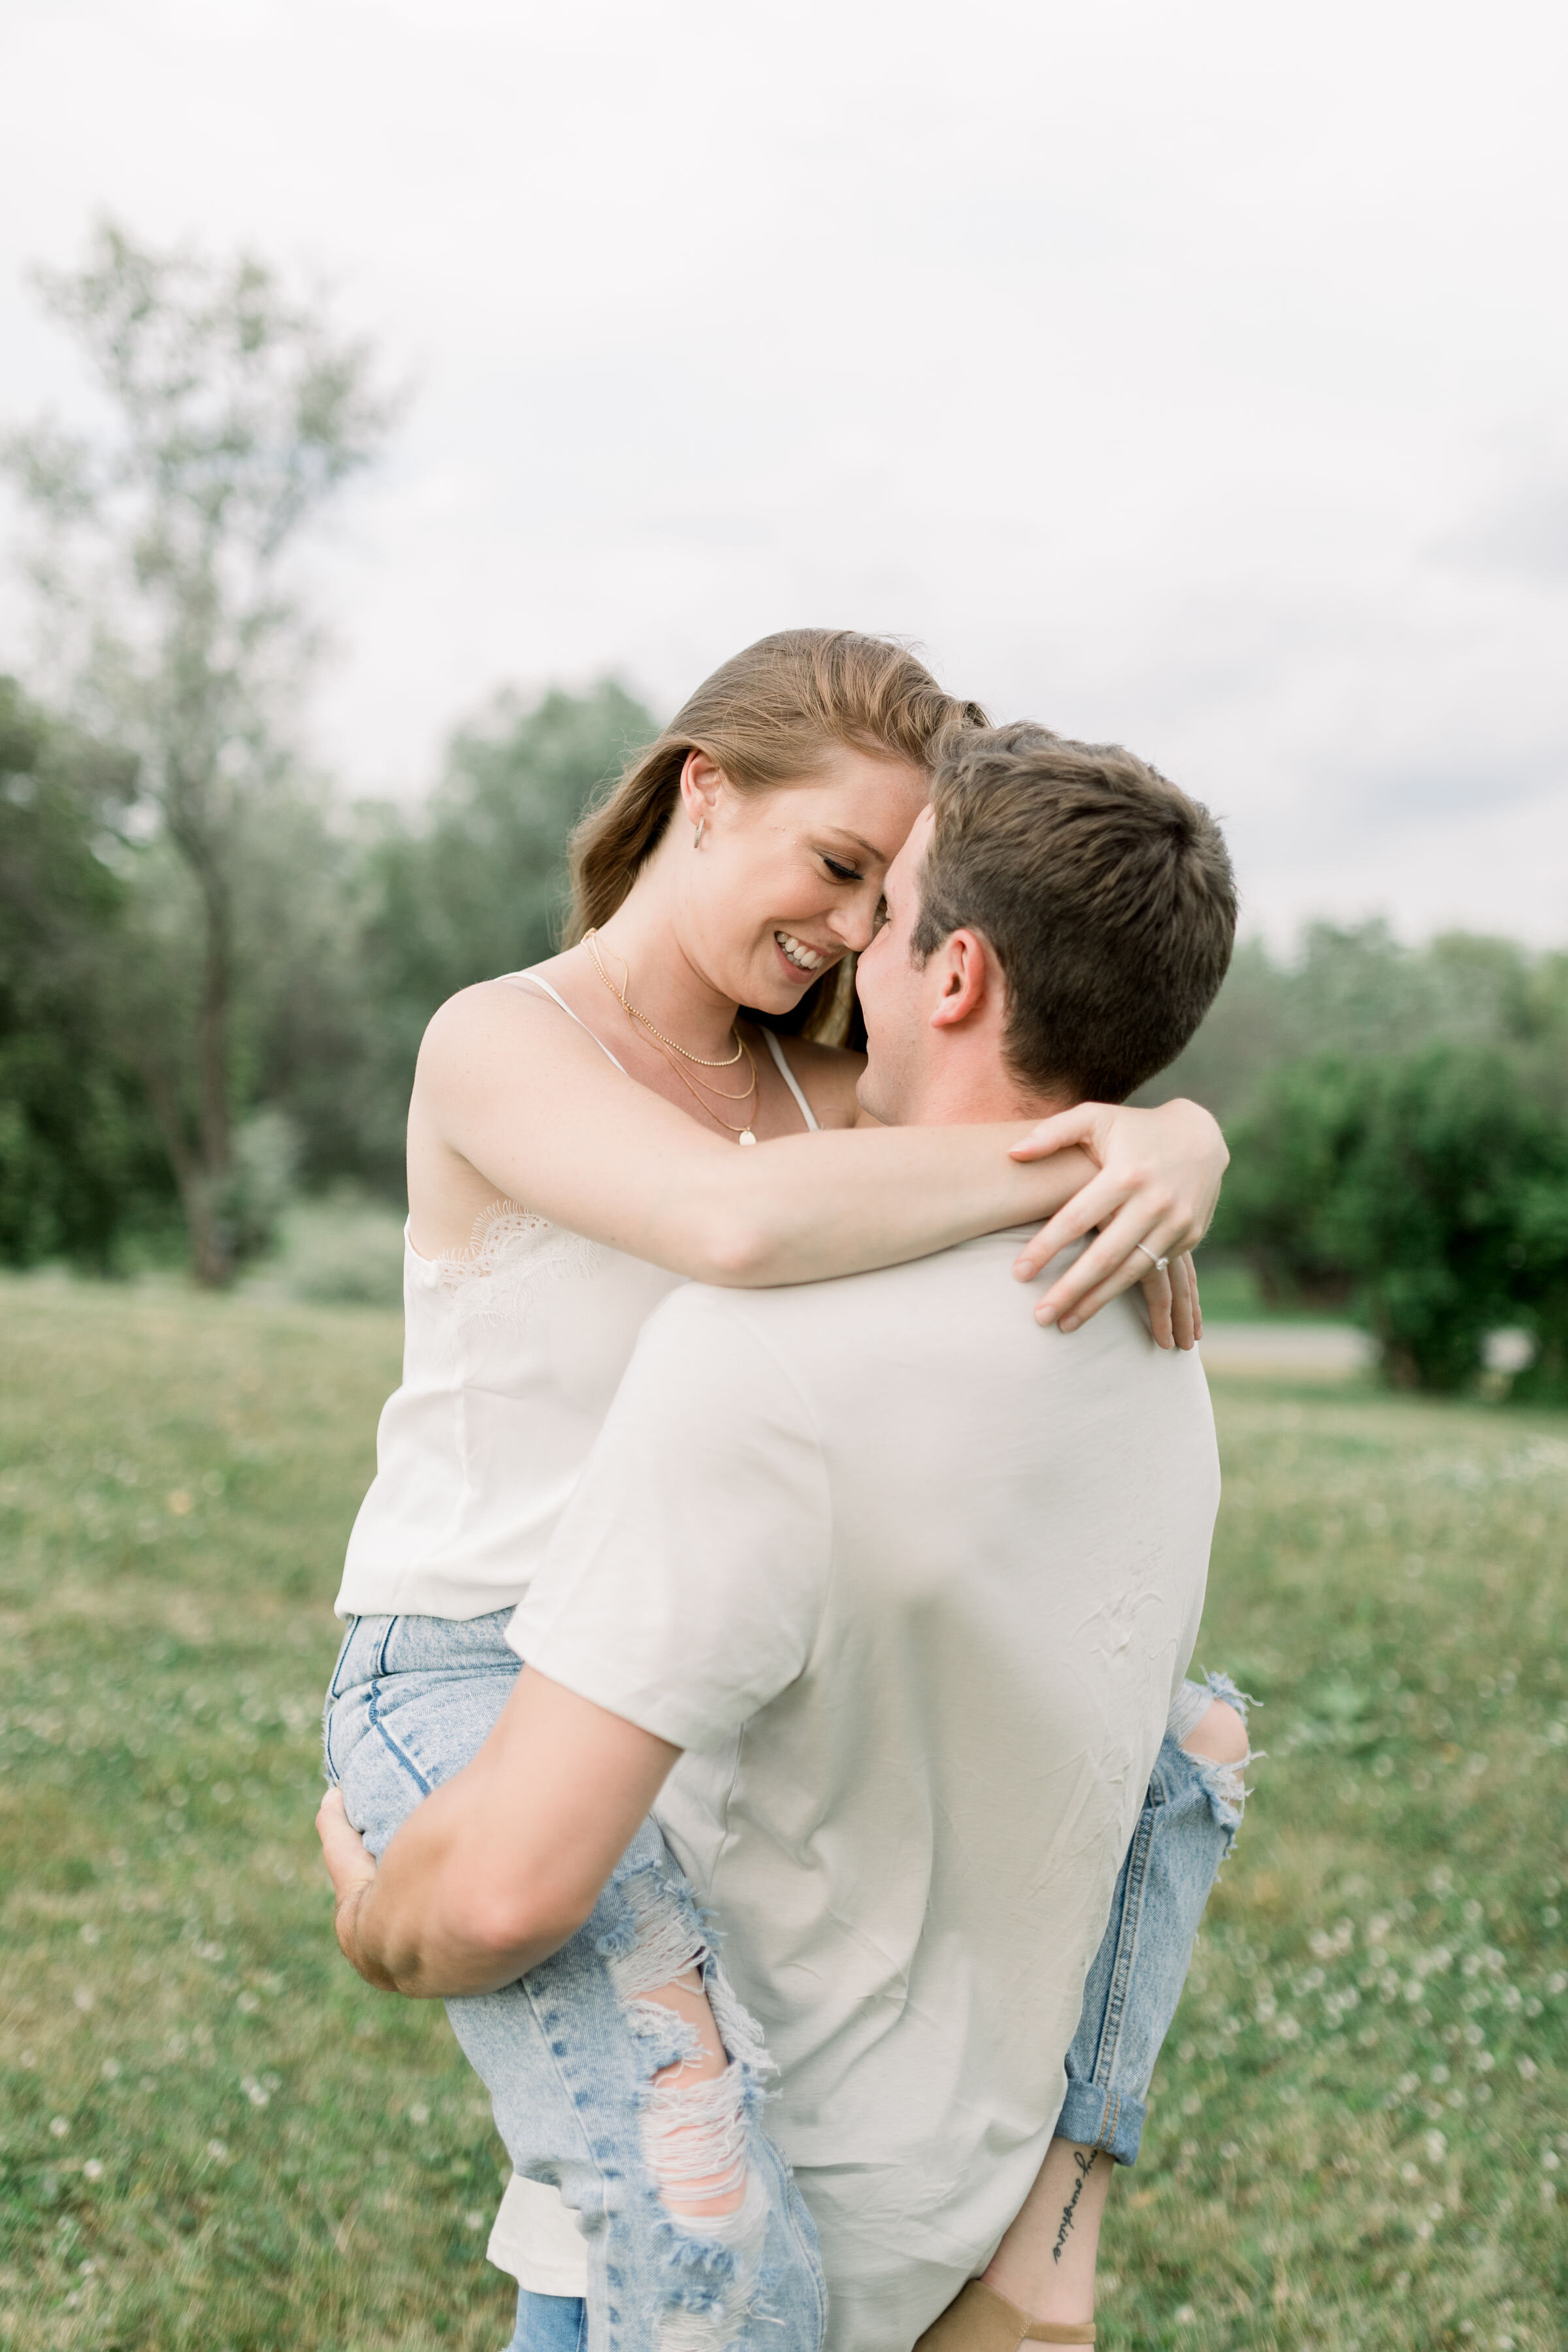  Chelsea Mason Photography captures a tender moment between this couple as they press foreheads together. couples pressing foreheads together romantic couple posing Ottawa Ontario couples photographer #ChelseaMasonPhotography #TheArboretum #OttawaOnt